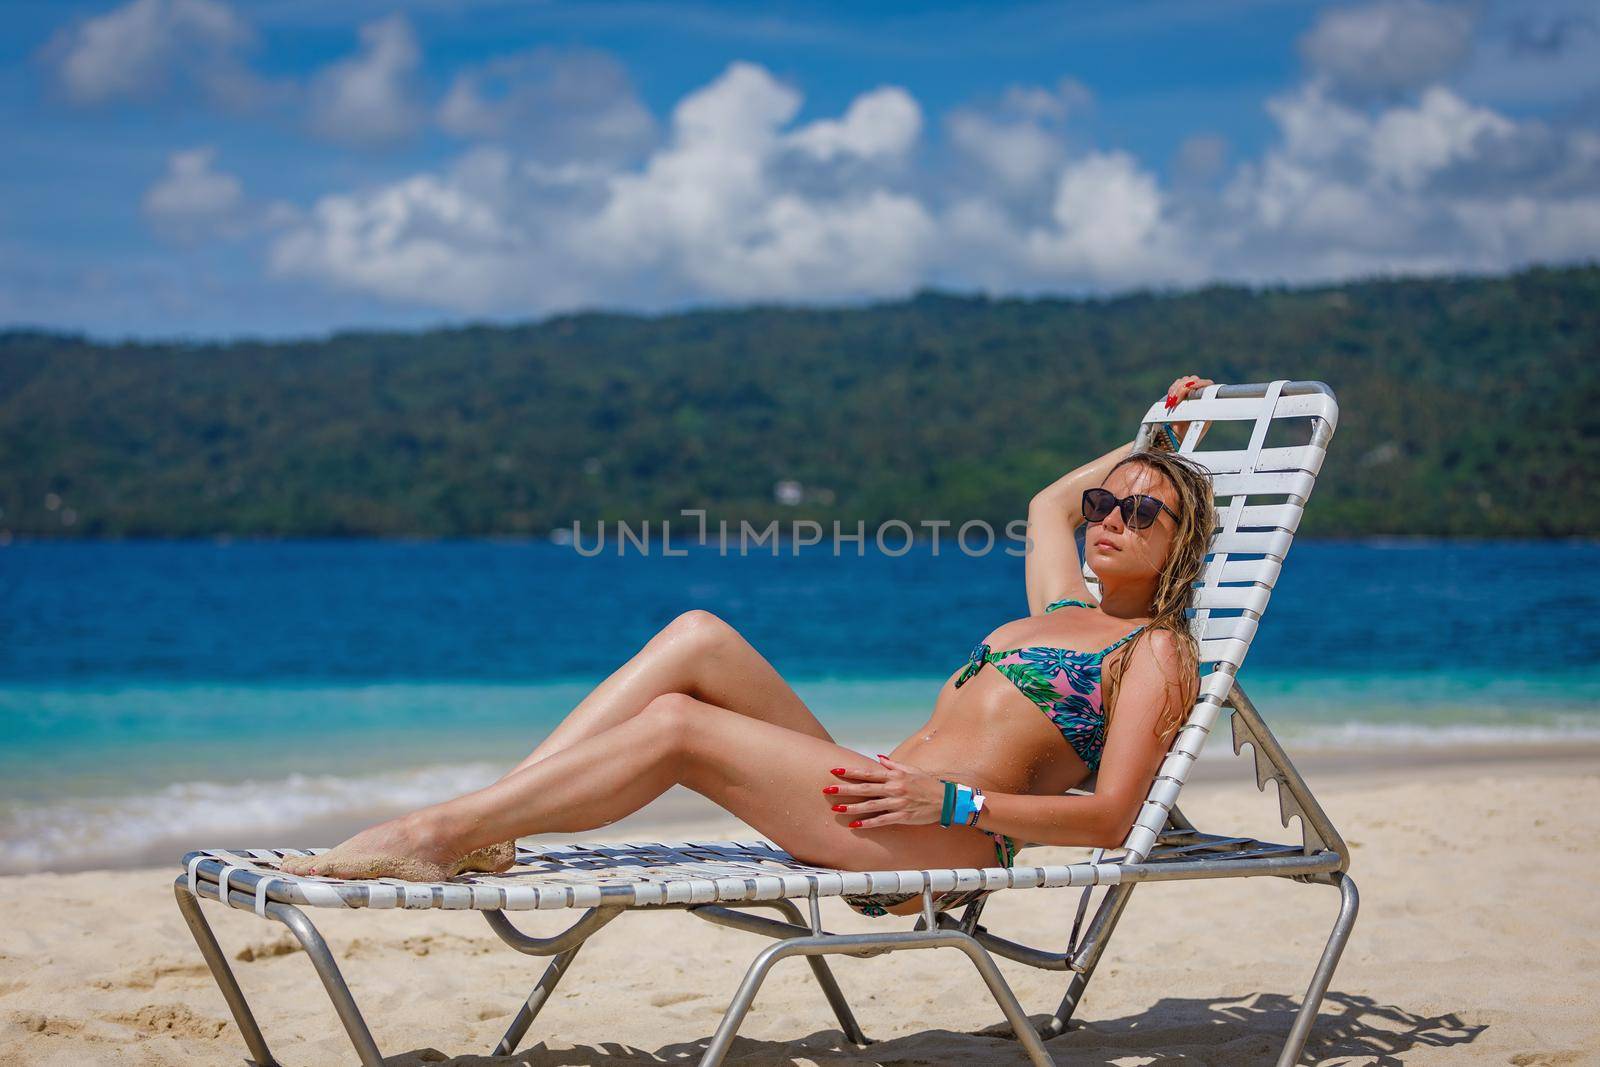 A young beautiful girl sunbathes on a sun lounger by the ocean. by Yurich32